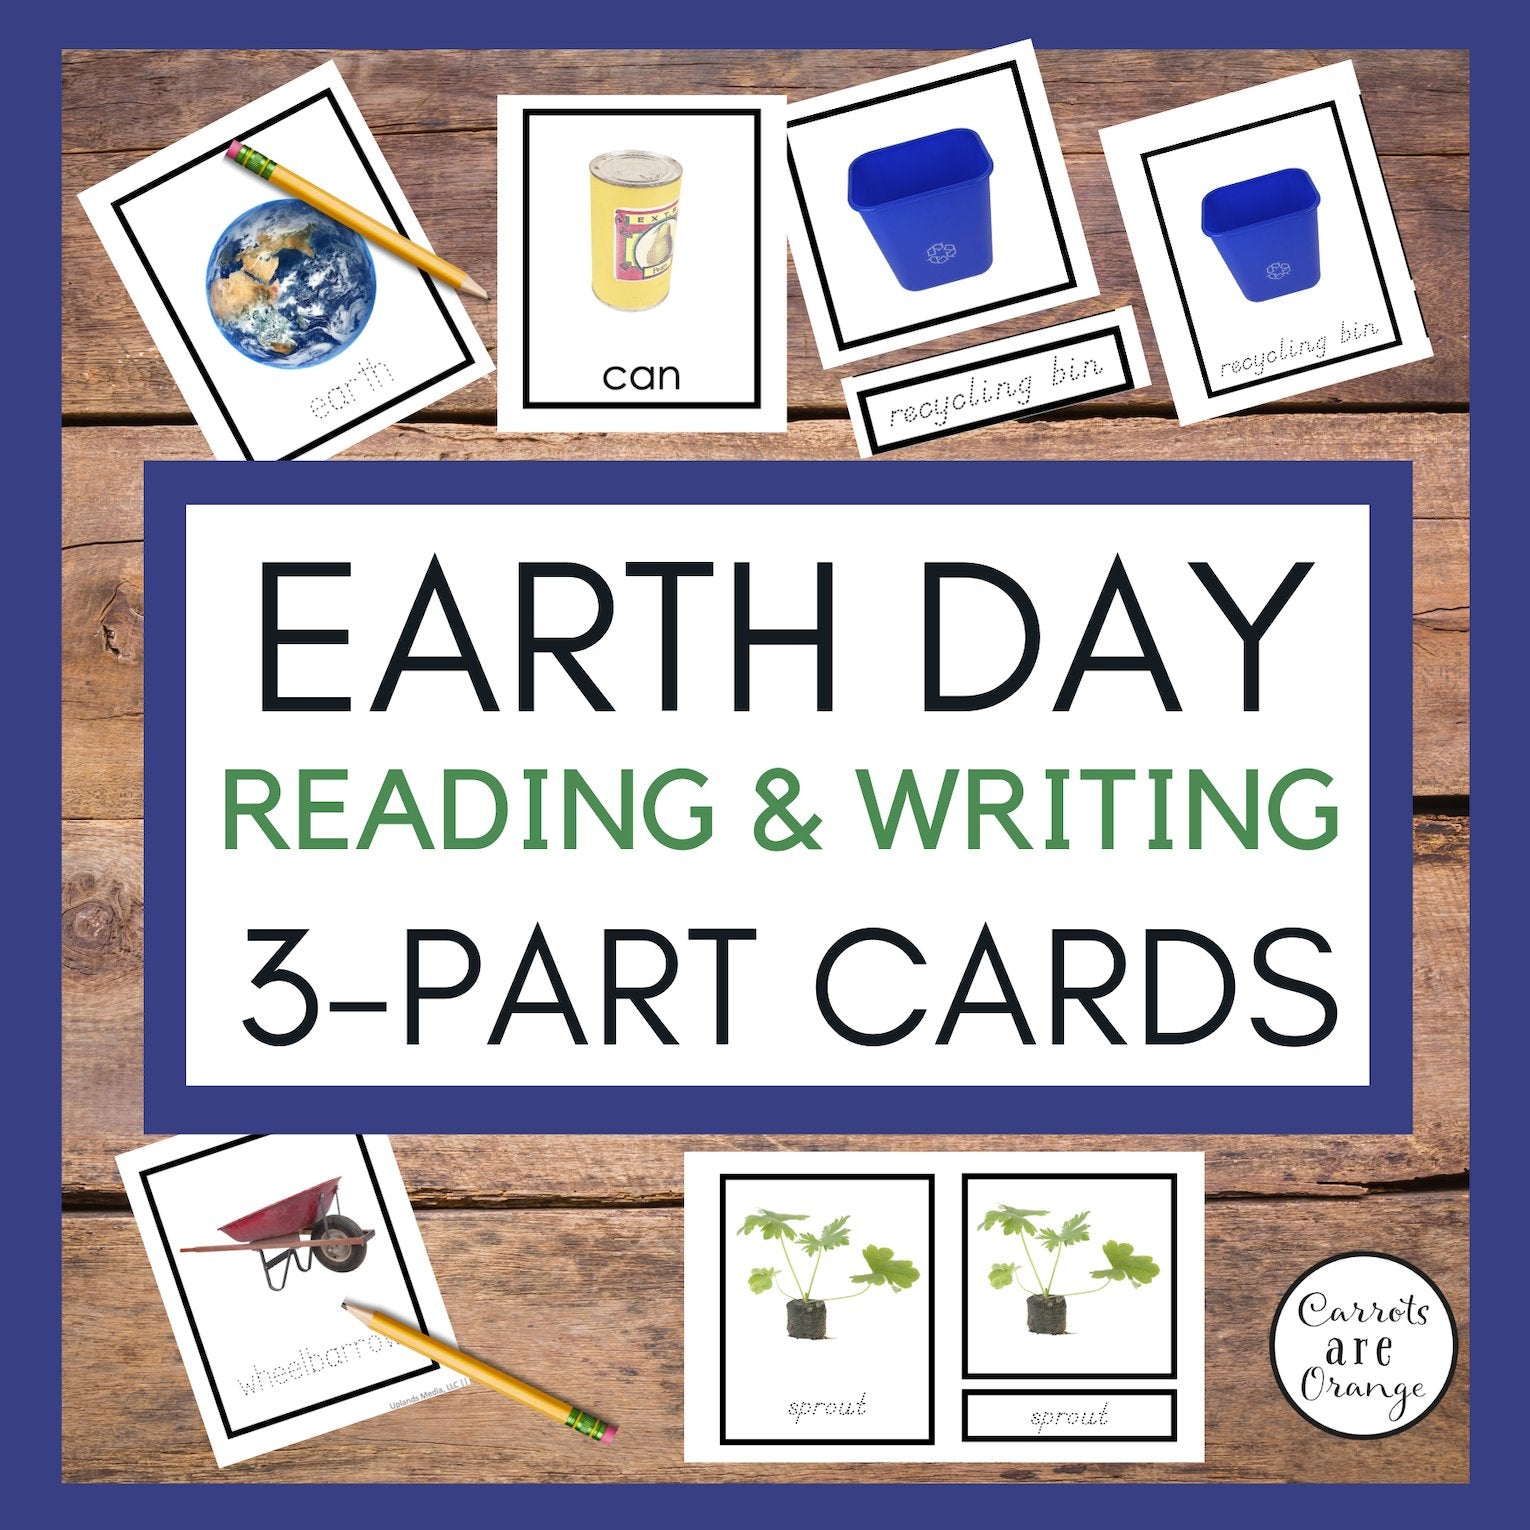 [3 Part Cards] Earth Day - Printables by Carrots Are Orange